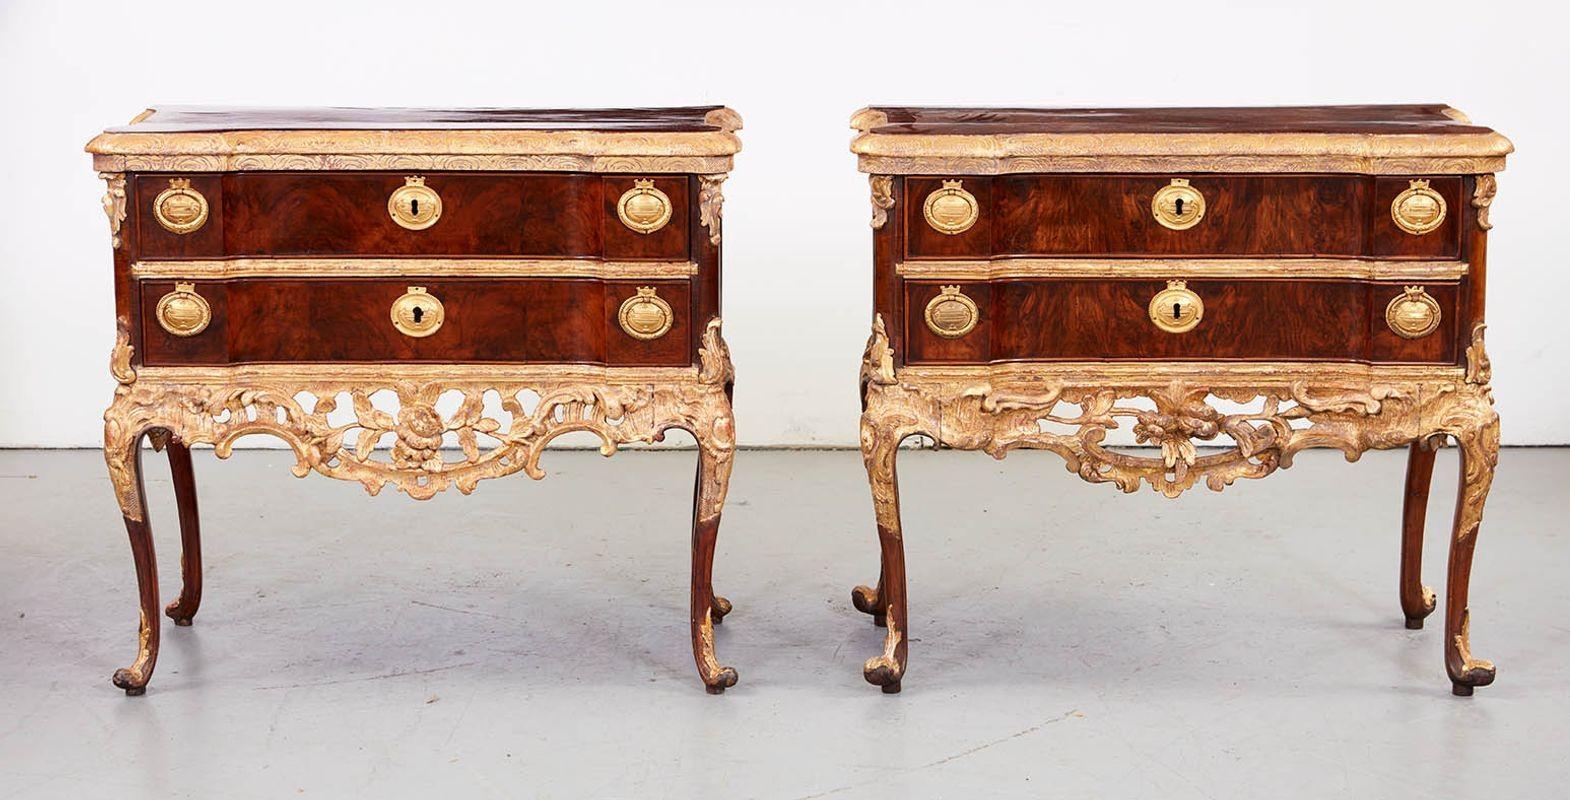 A Pair of Altona Walnut and Gilt Commodes Attributed to Johann Friedrich Köster
 
A fine pair of transitional commodes in walnut and giltwood, the walnut tops with crossbanding and carved giltwood molded edge over shaped drawers with giltwood